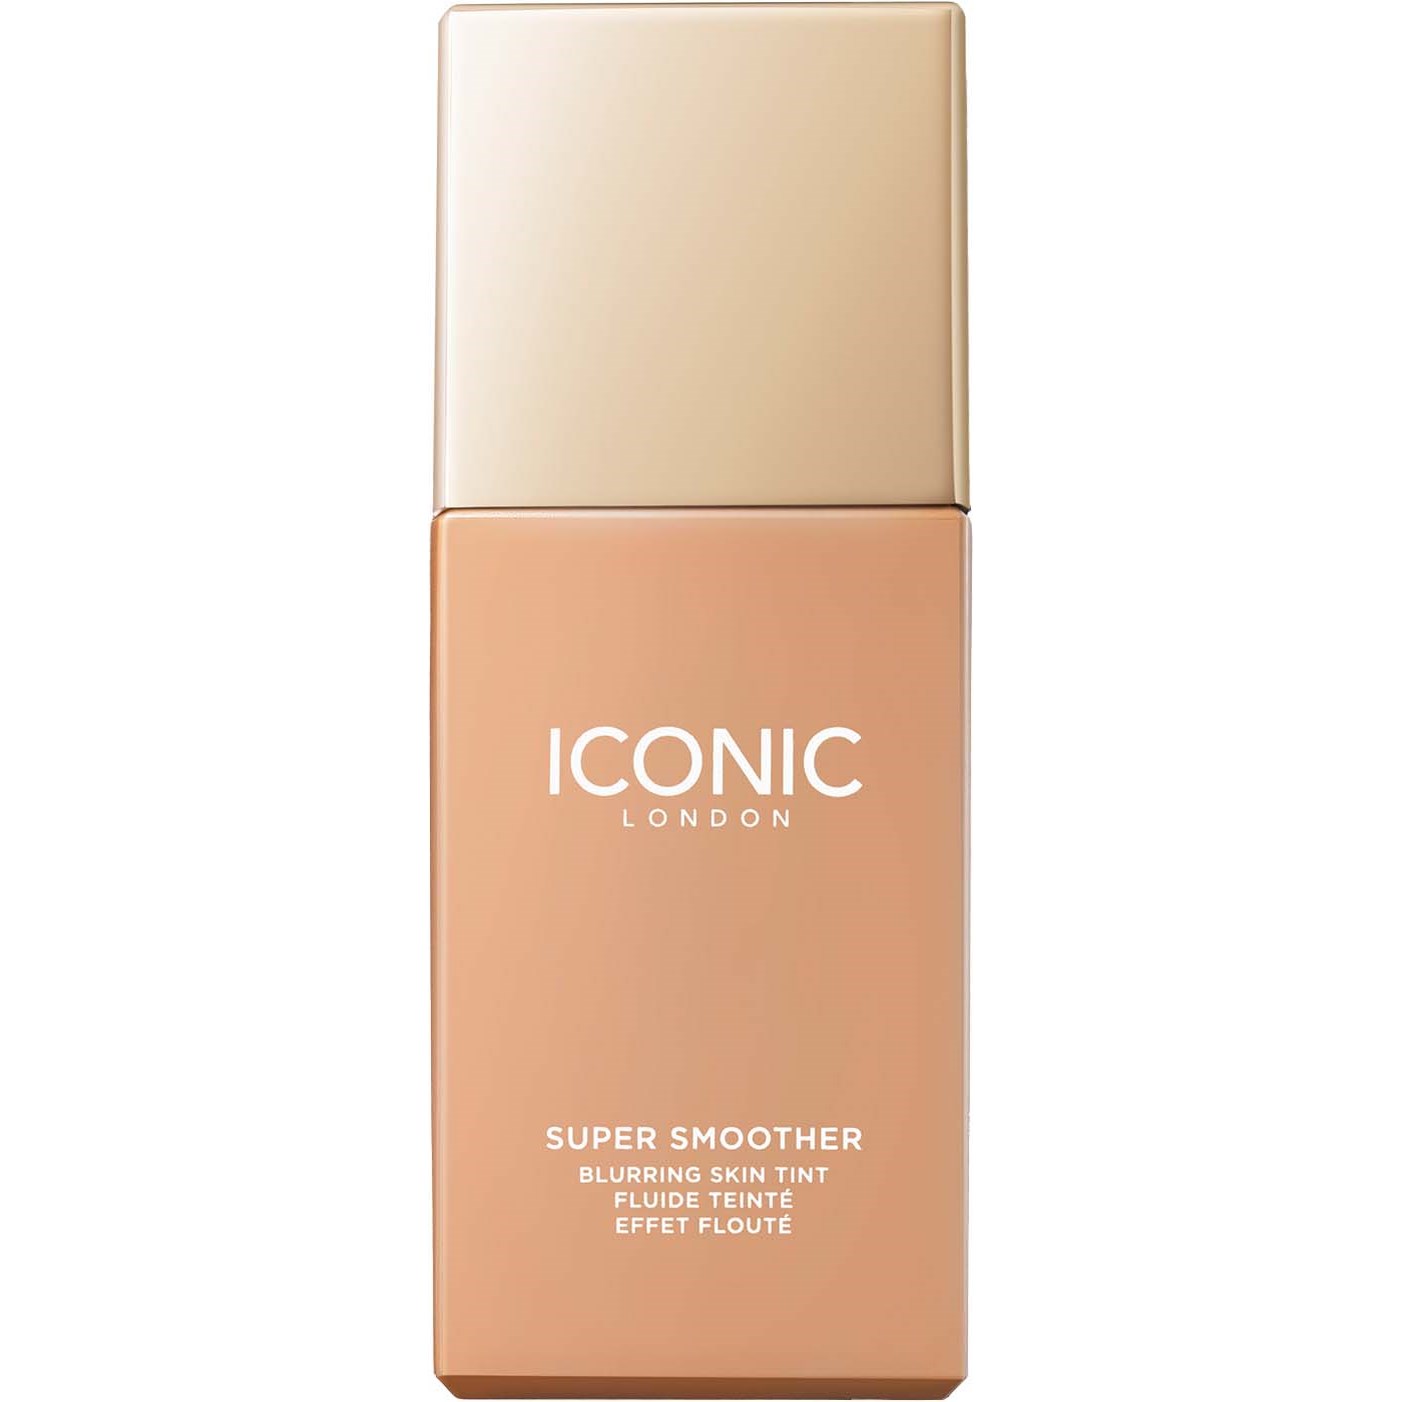 ICONIC London Super Smoother Blurring Skin Tint Cool Light